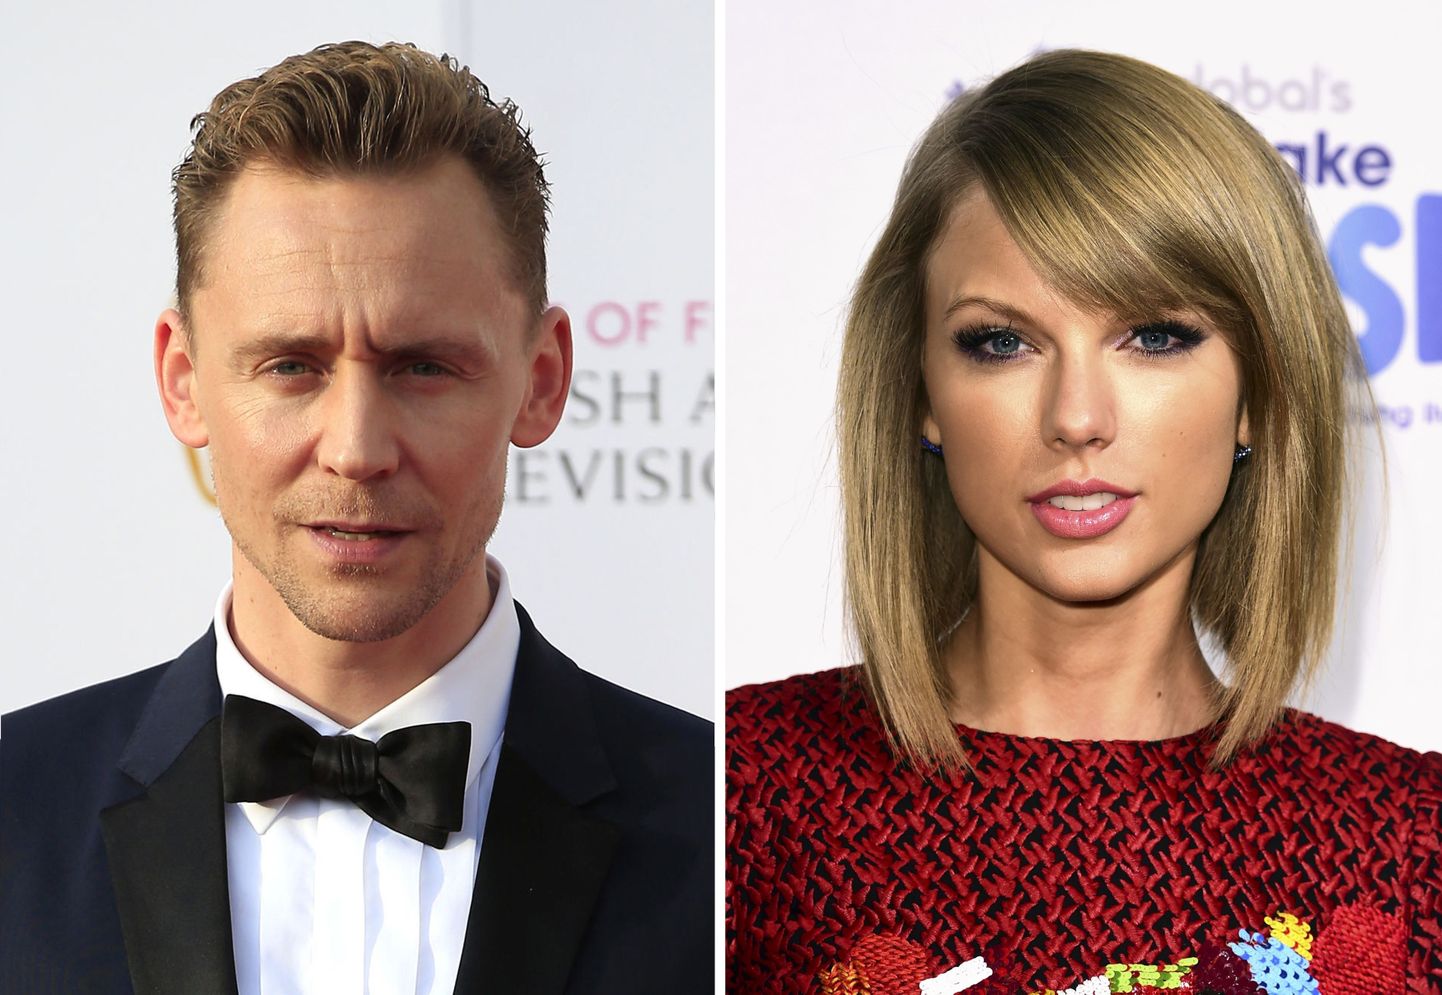 File photos of Tom Hiddleston and Taylor Swift, who have been pictured kissing and embracing amid reports of a romance.